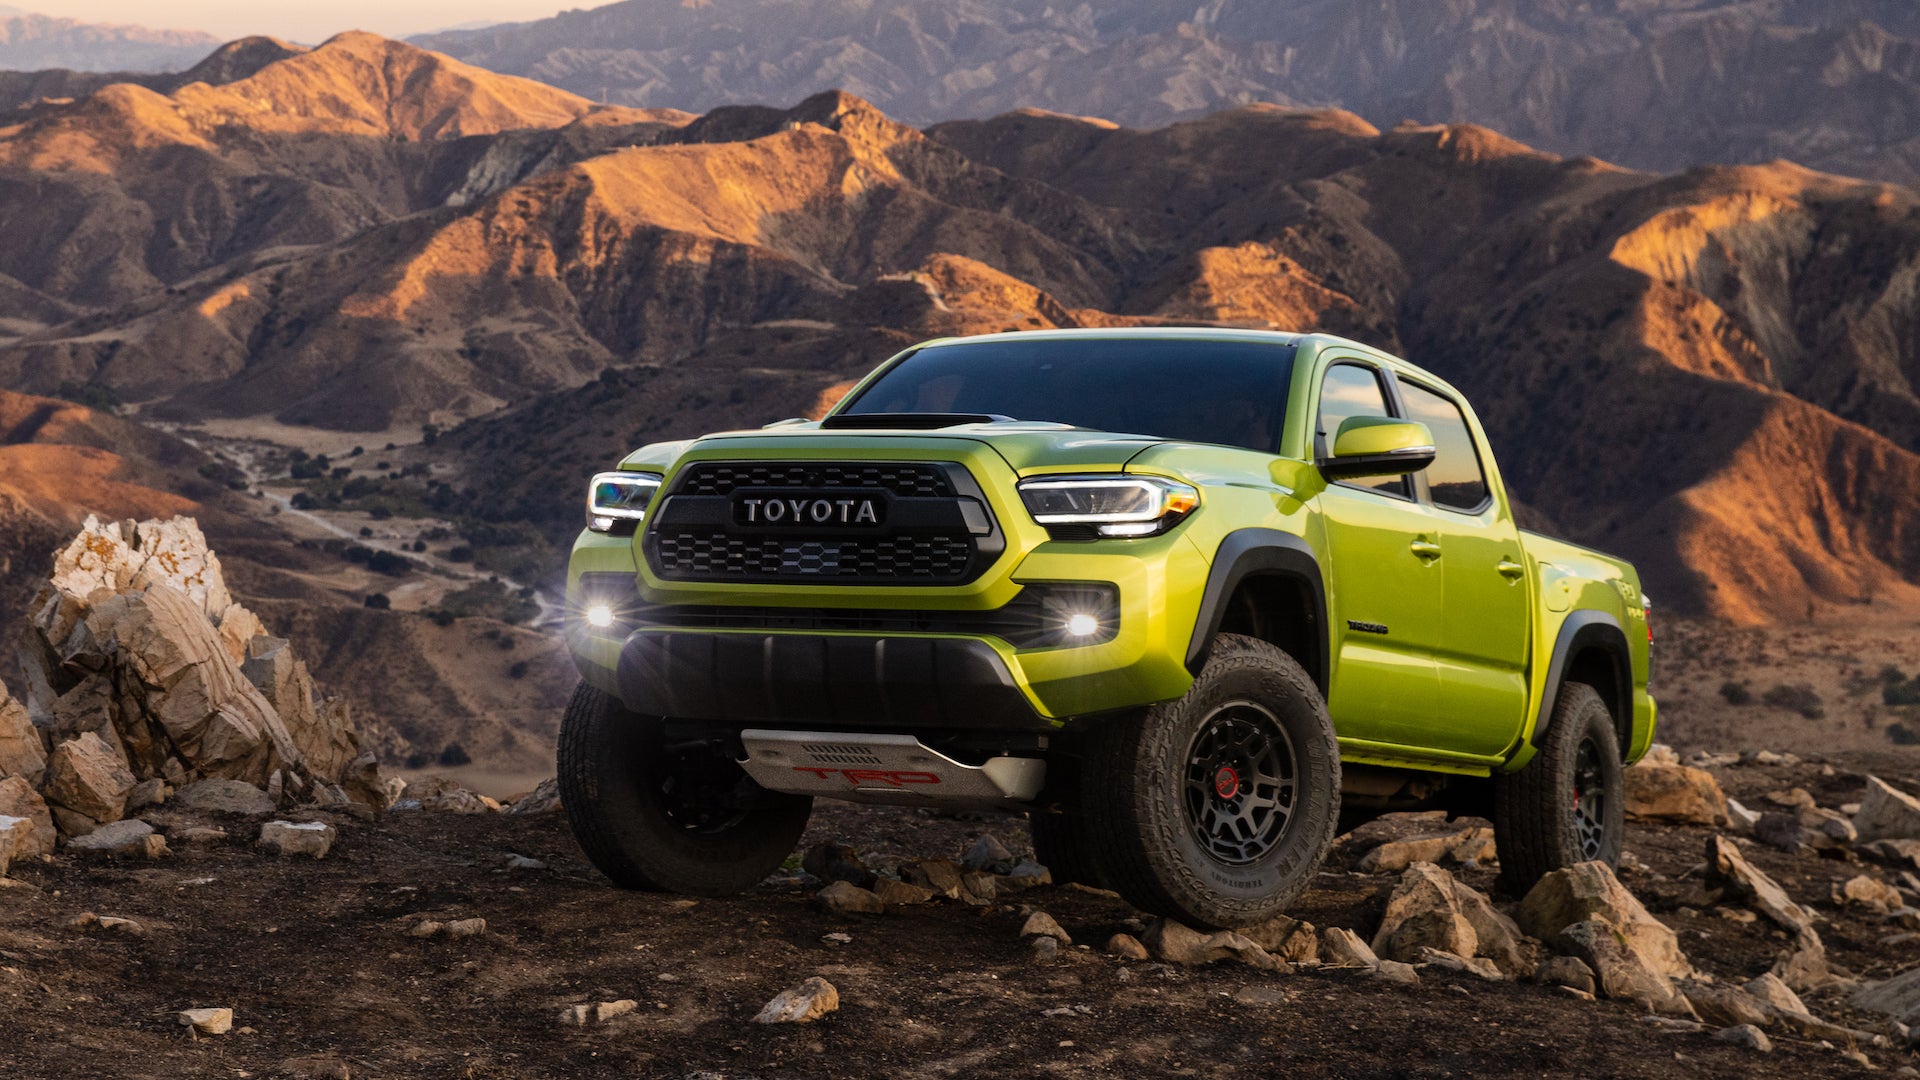 2022 Toyota Tacoma TRD Pro and Trail Edition: More Lift, More Colors